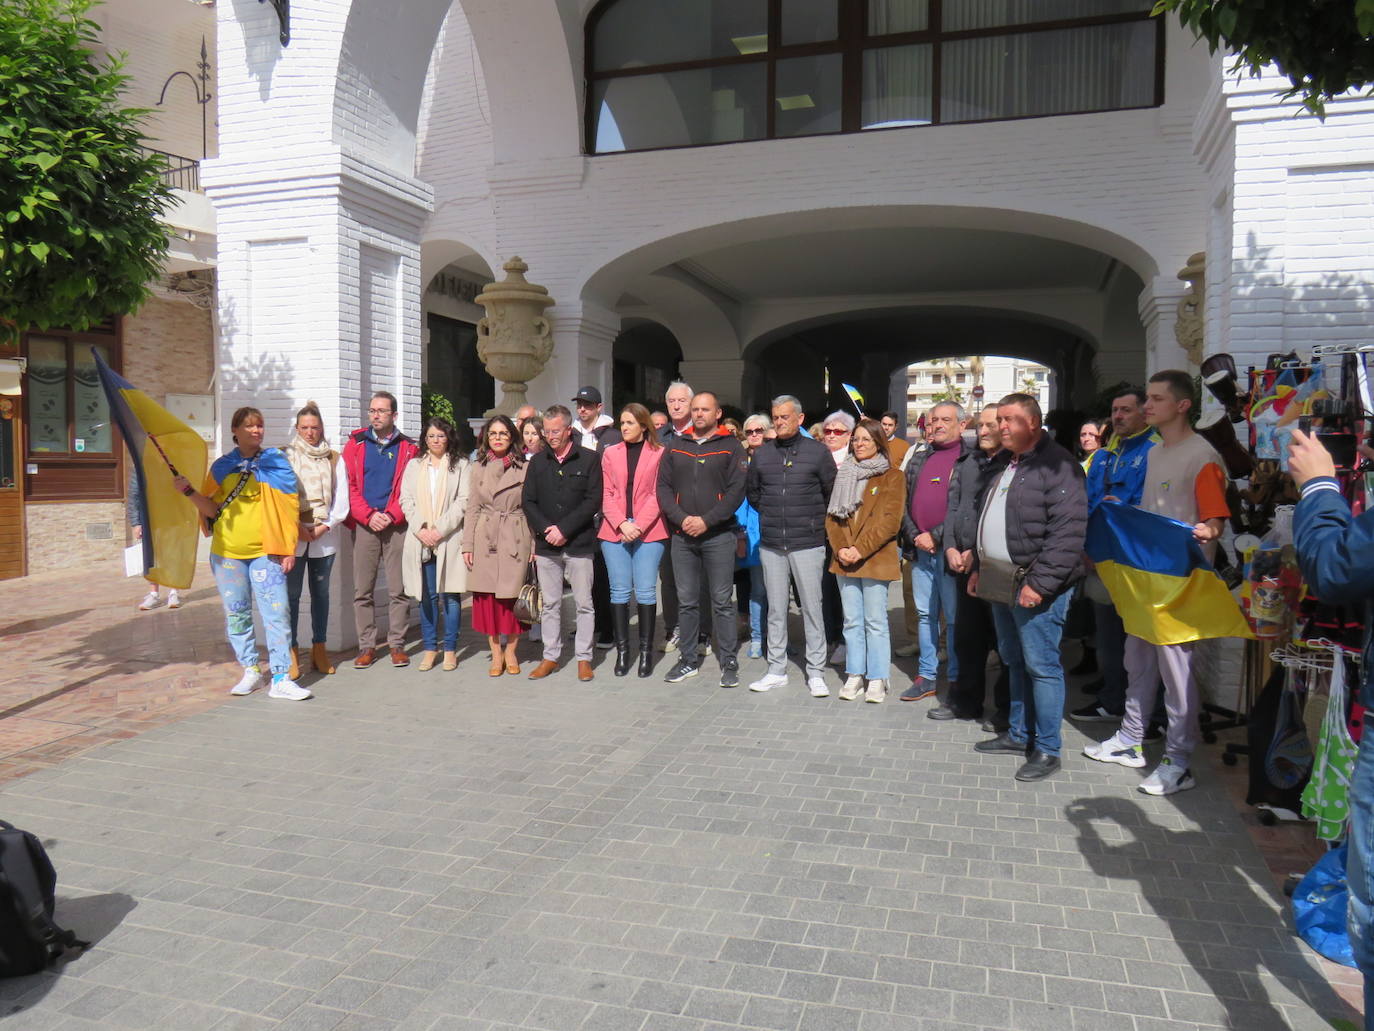 The group gathered outside Nerja town hall.